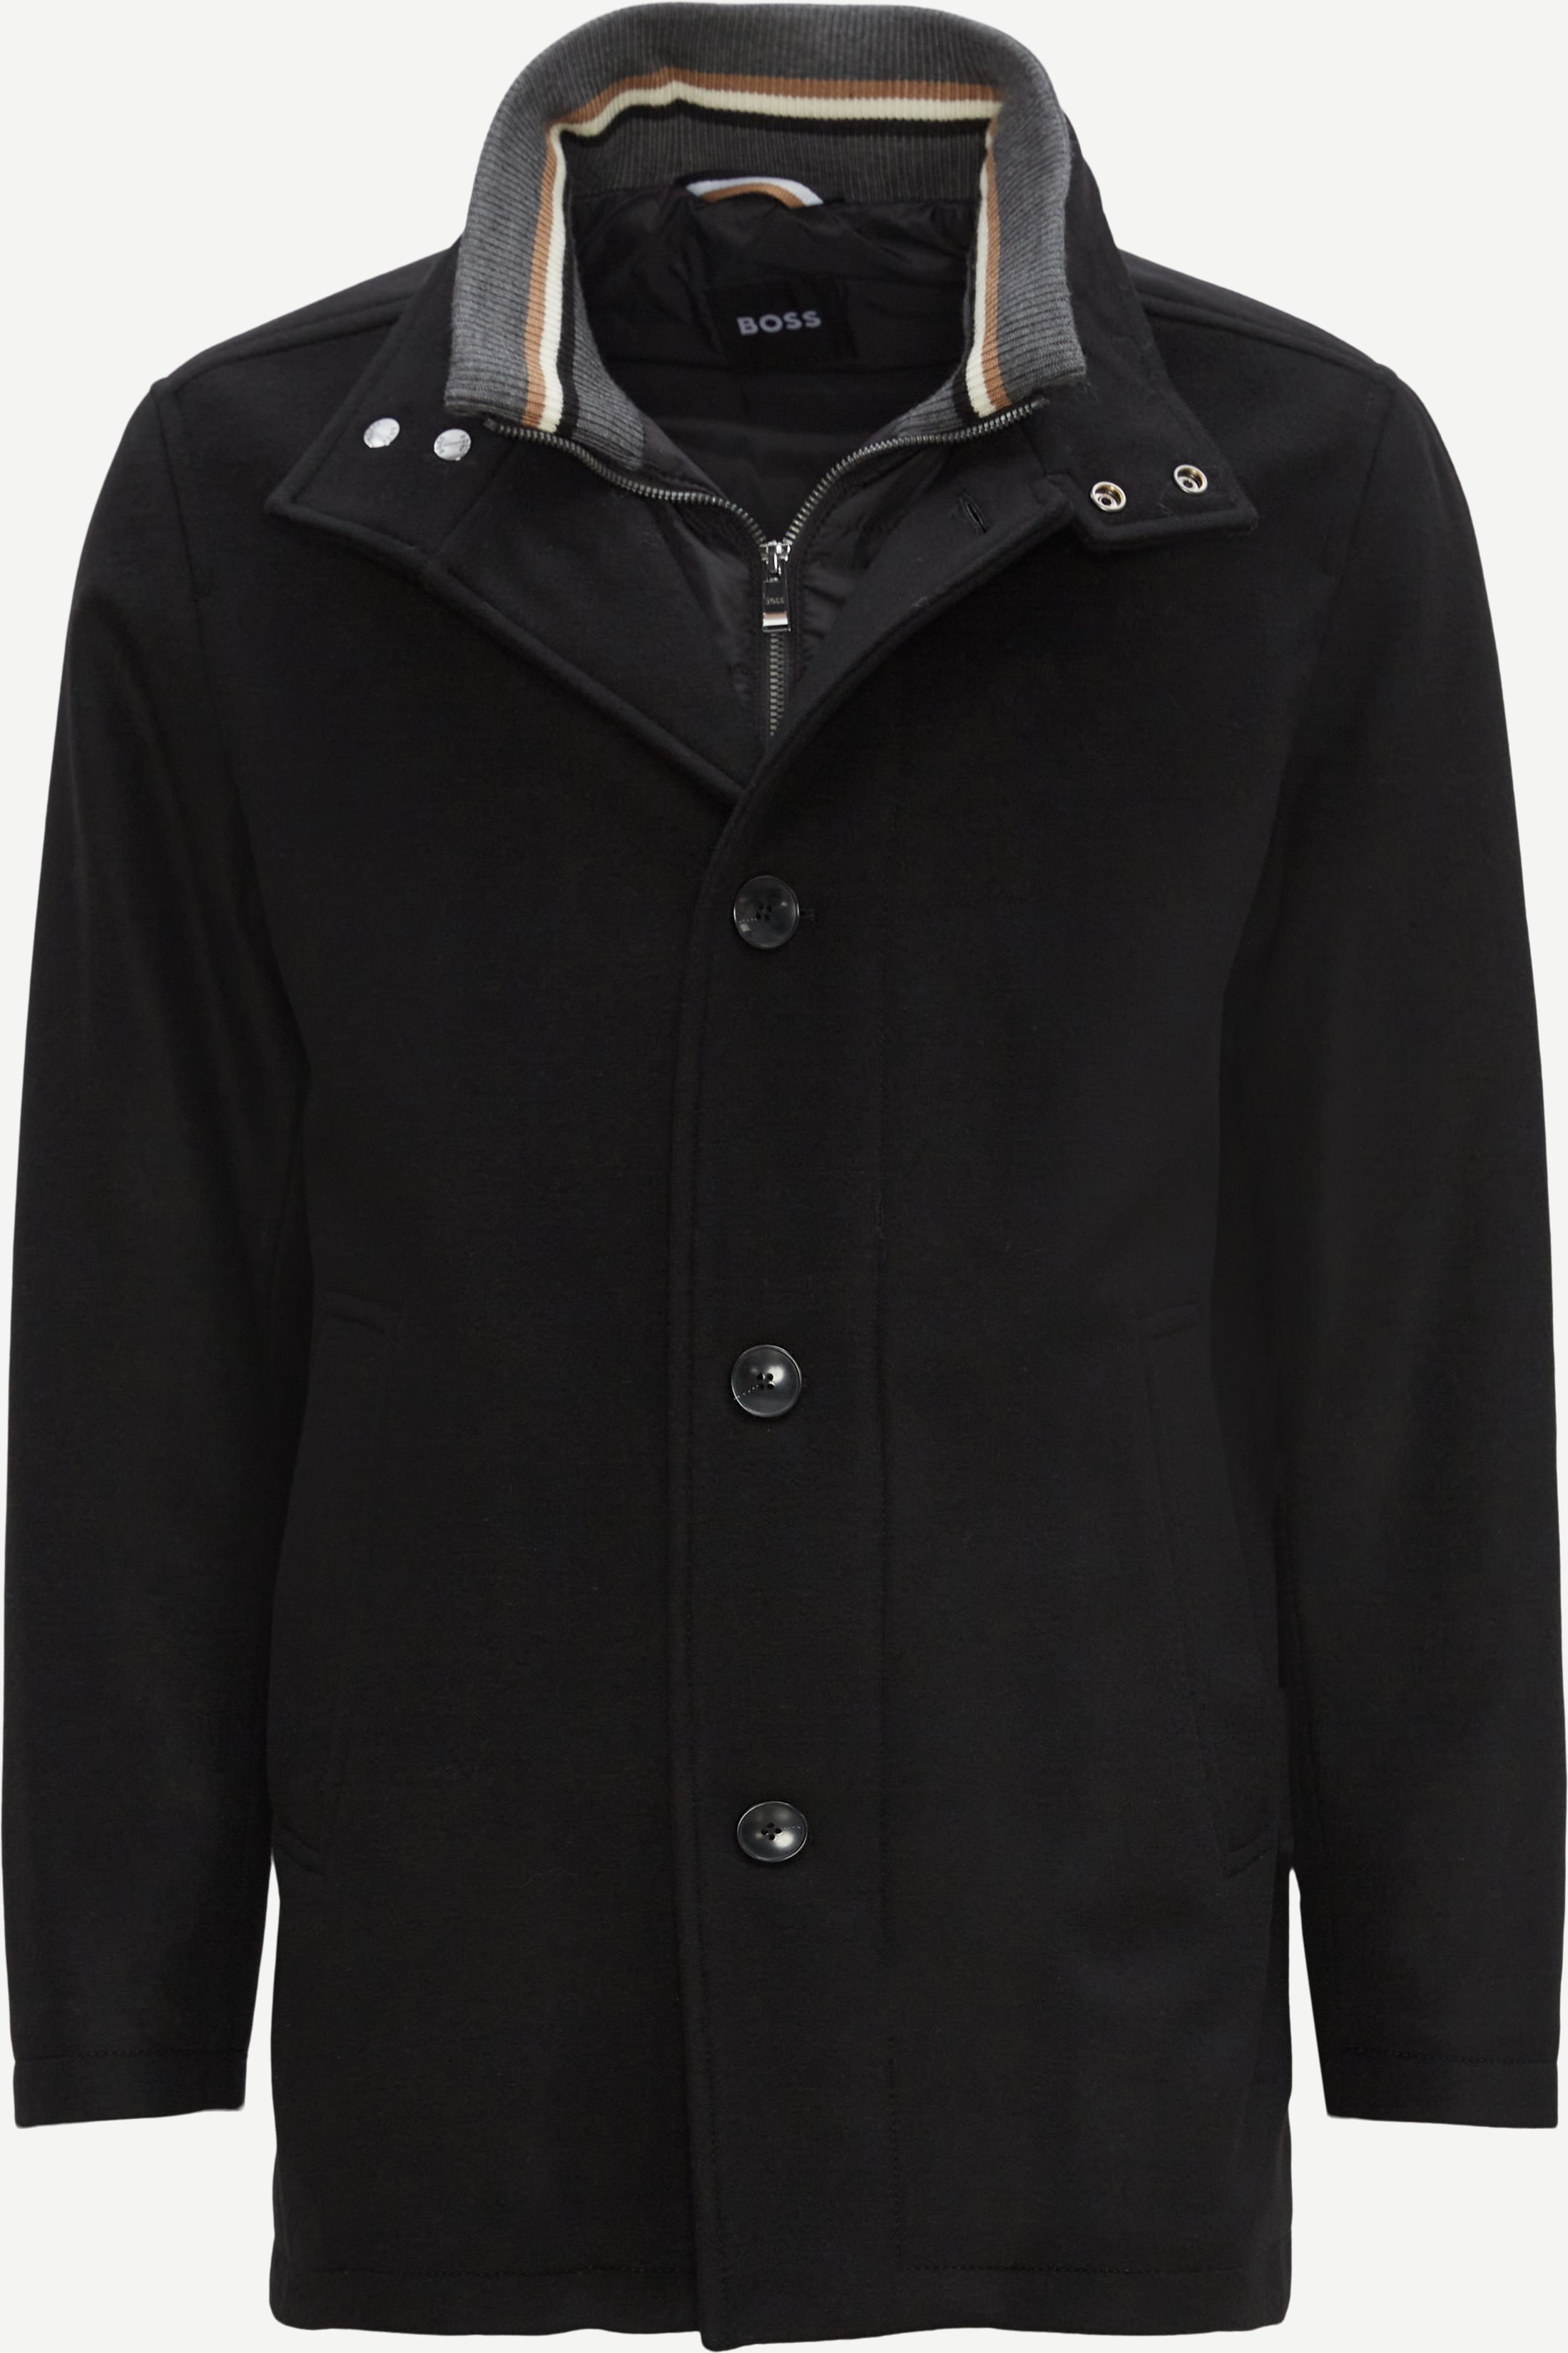 Jackets - Relaxed fit - Black